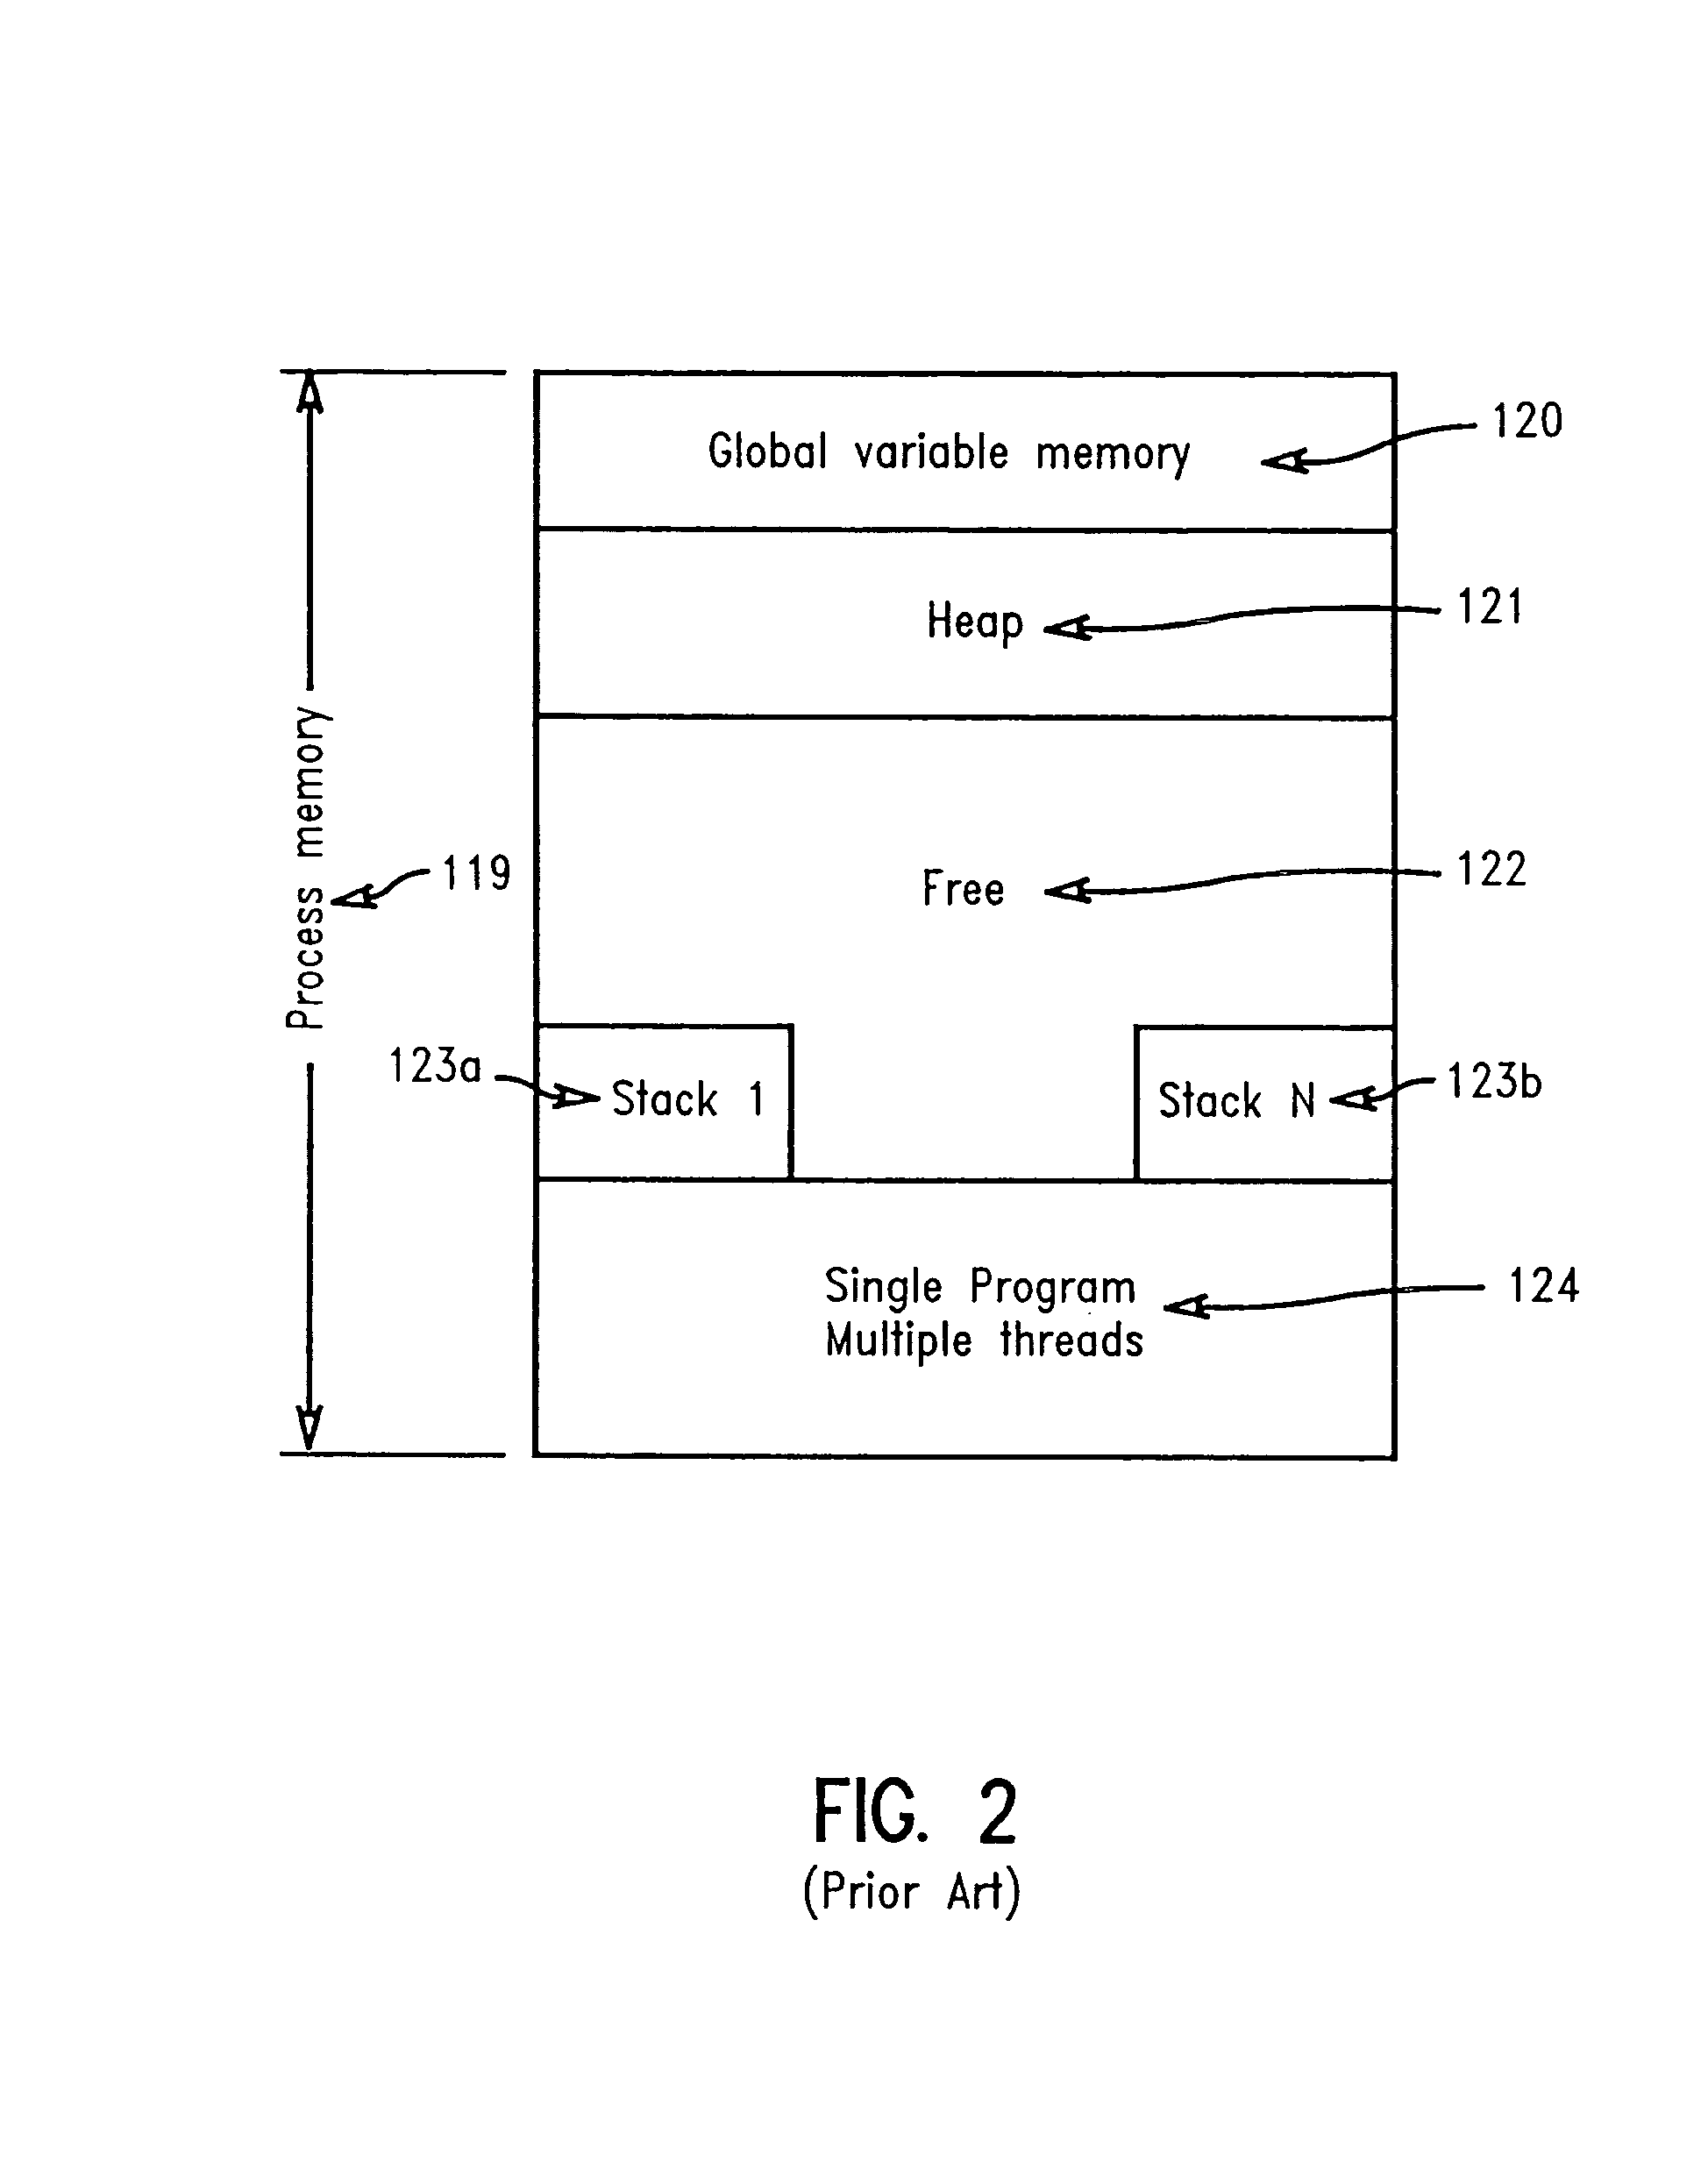 Method of using a distinct flow of computational control as a reusable abstract data object